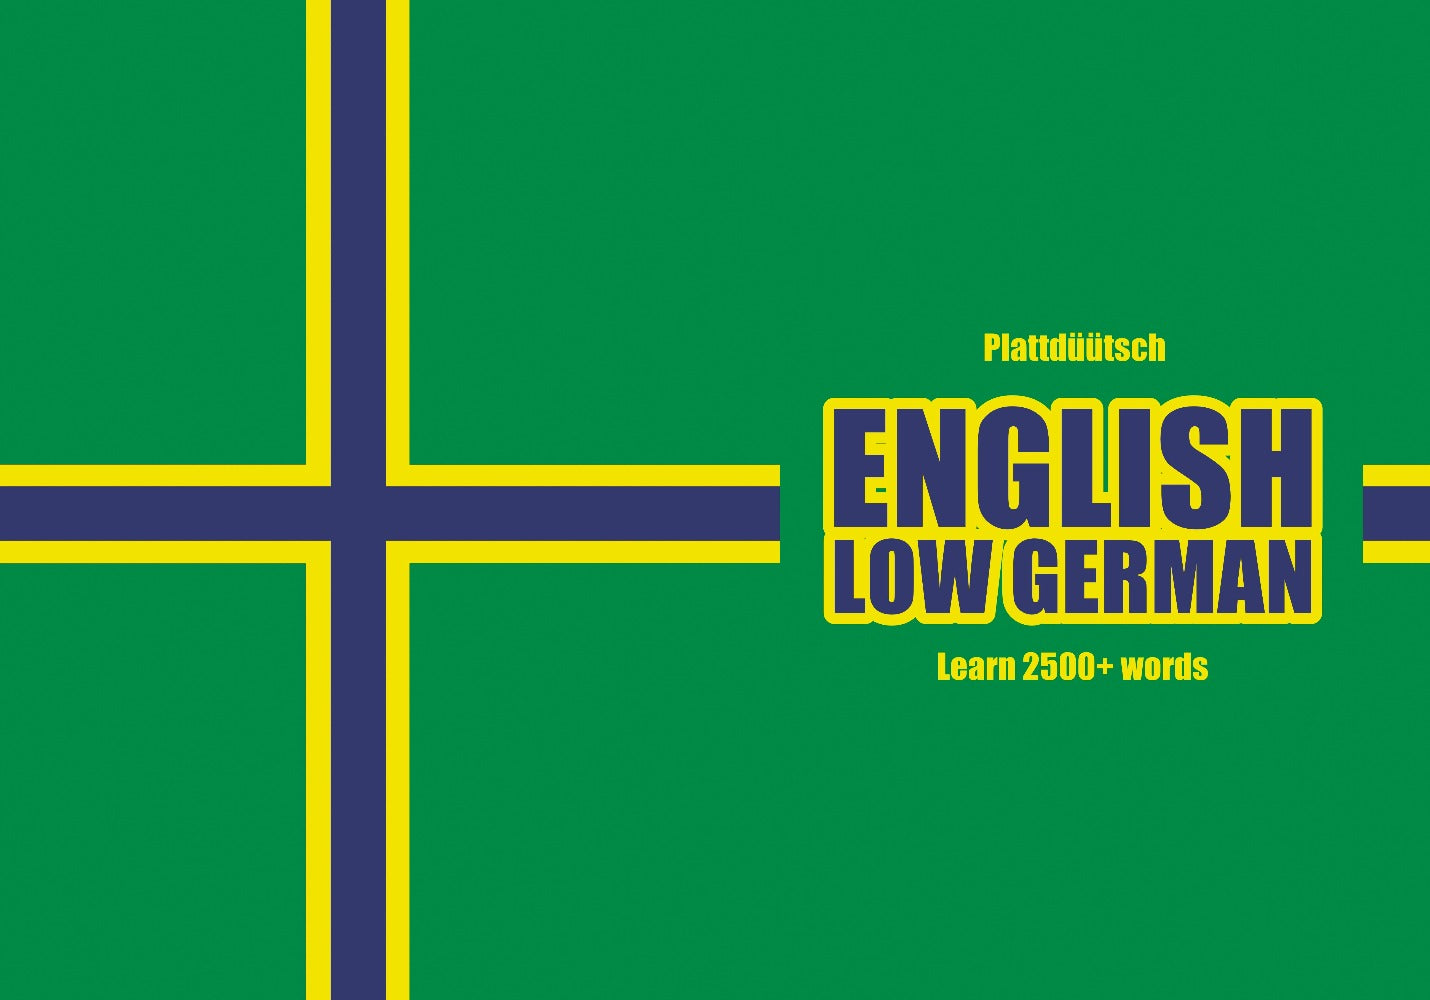 Low German language learning notebook cover